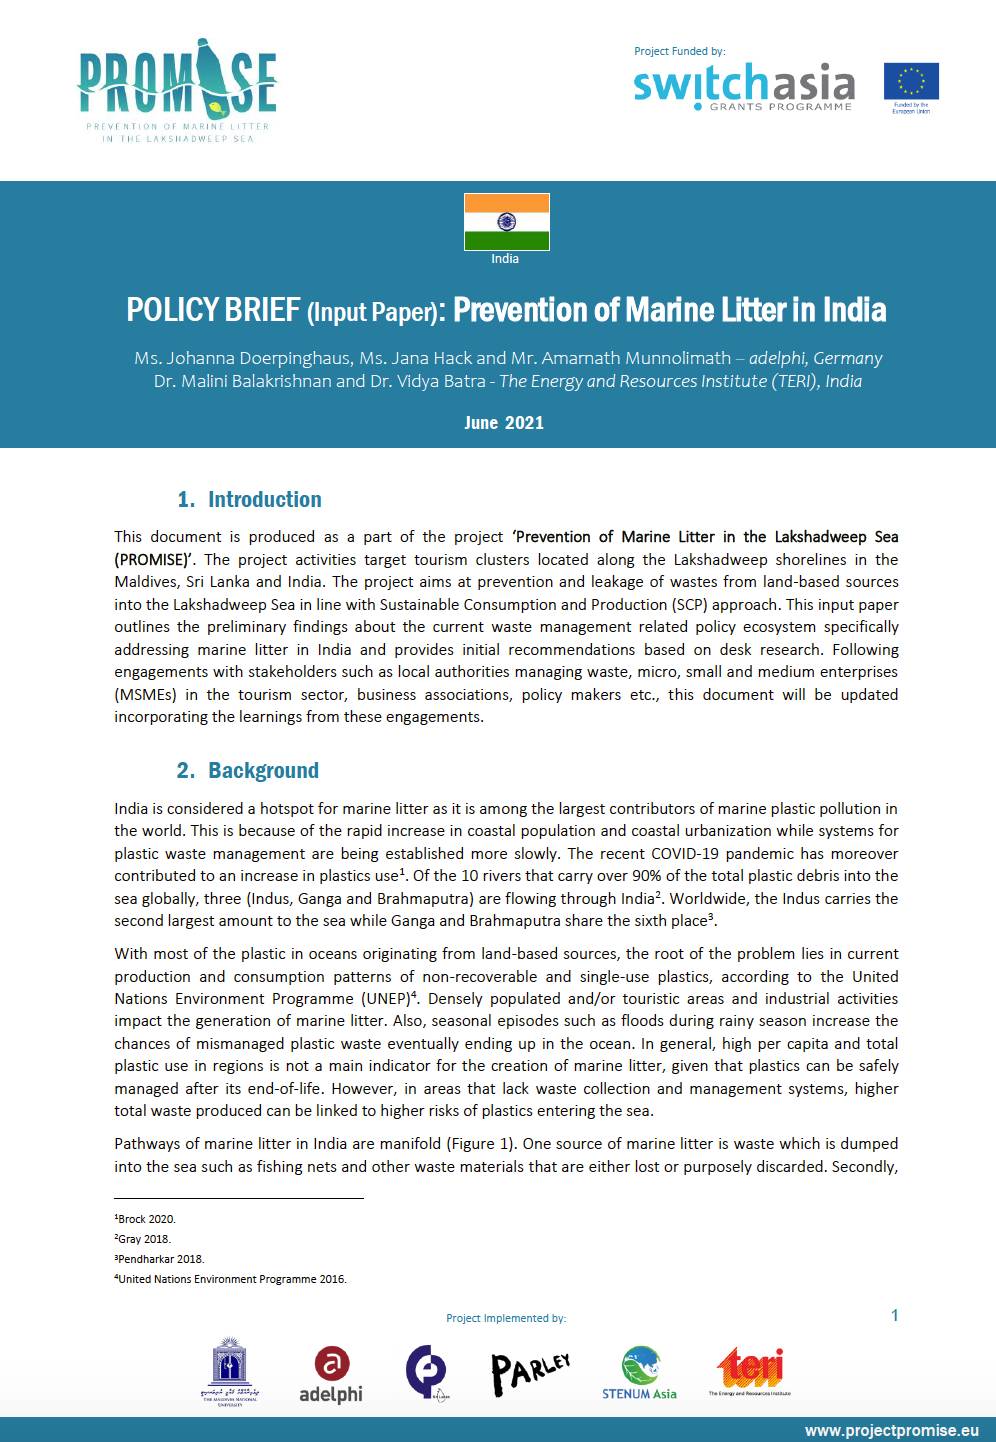 POLICY BRIEF: Prevention of Marine Litter in India